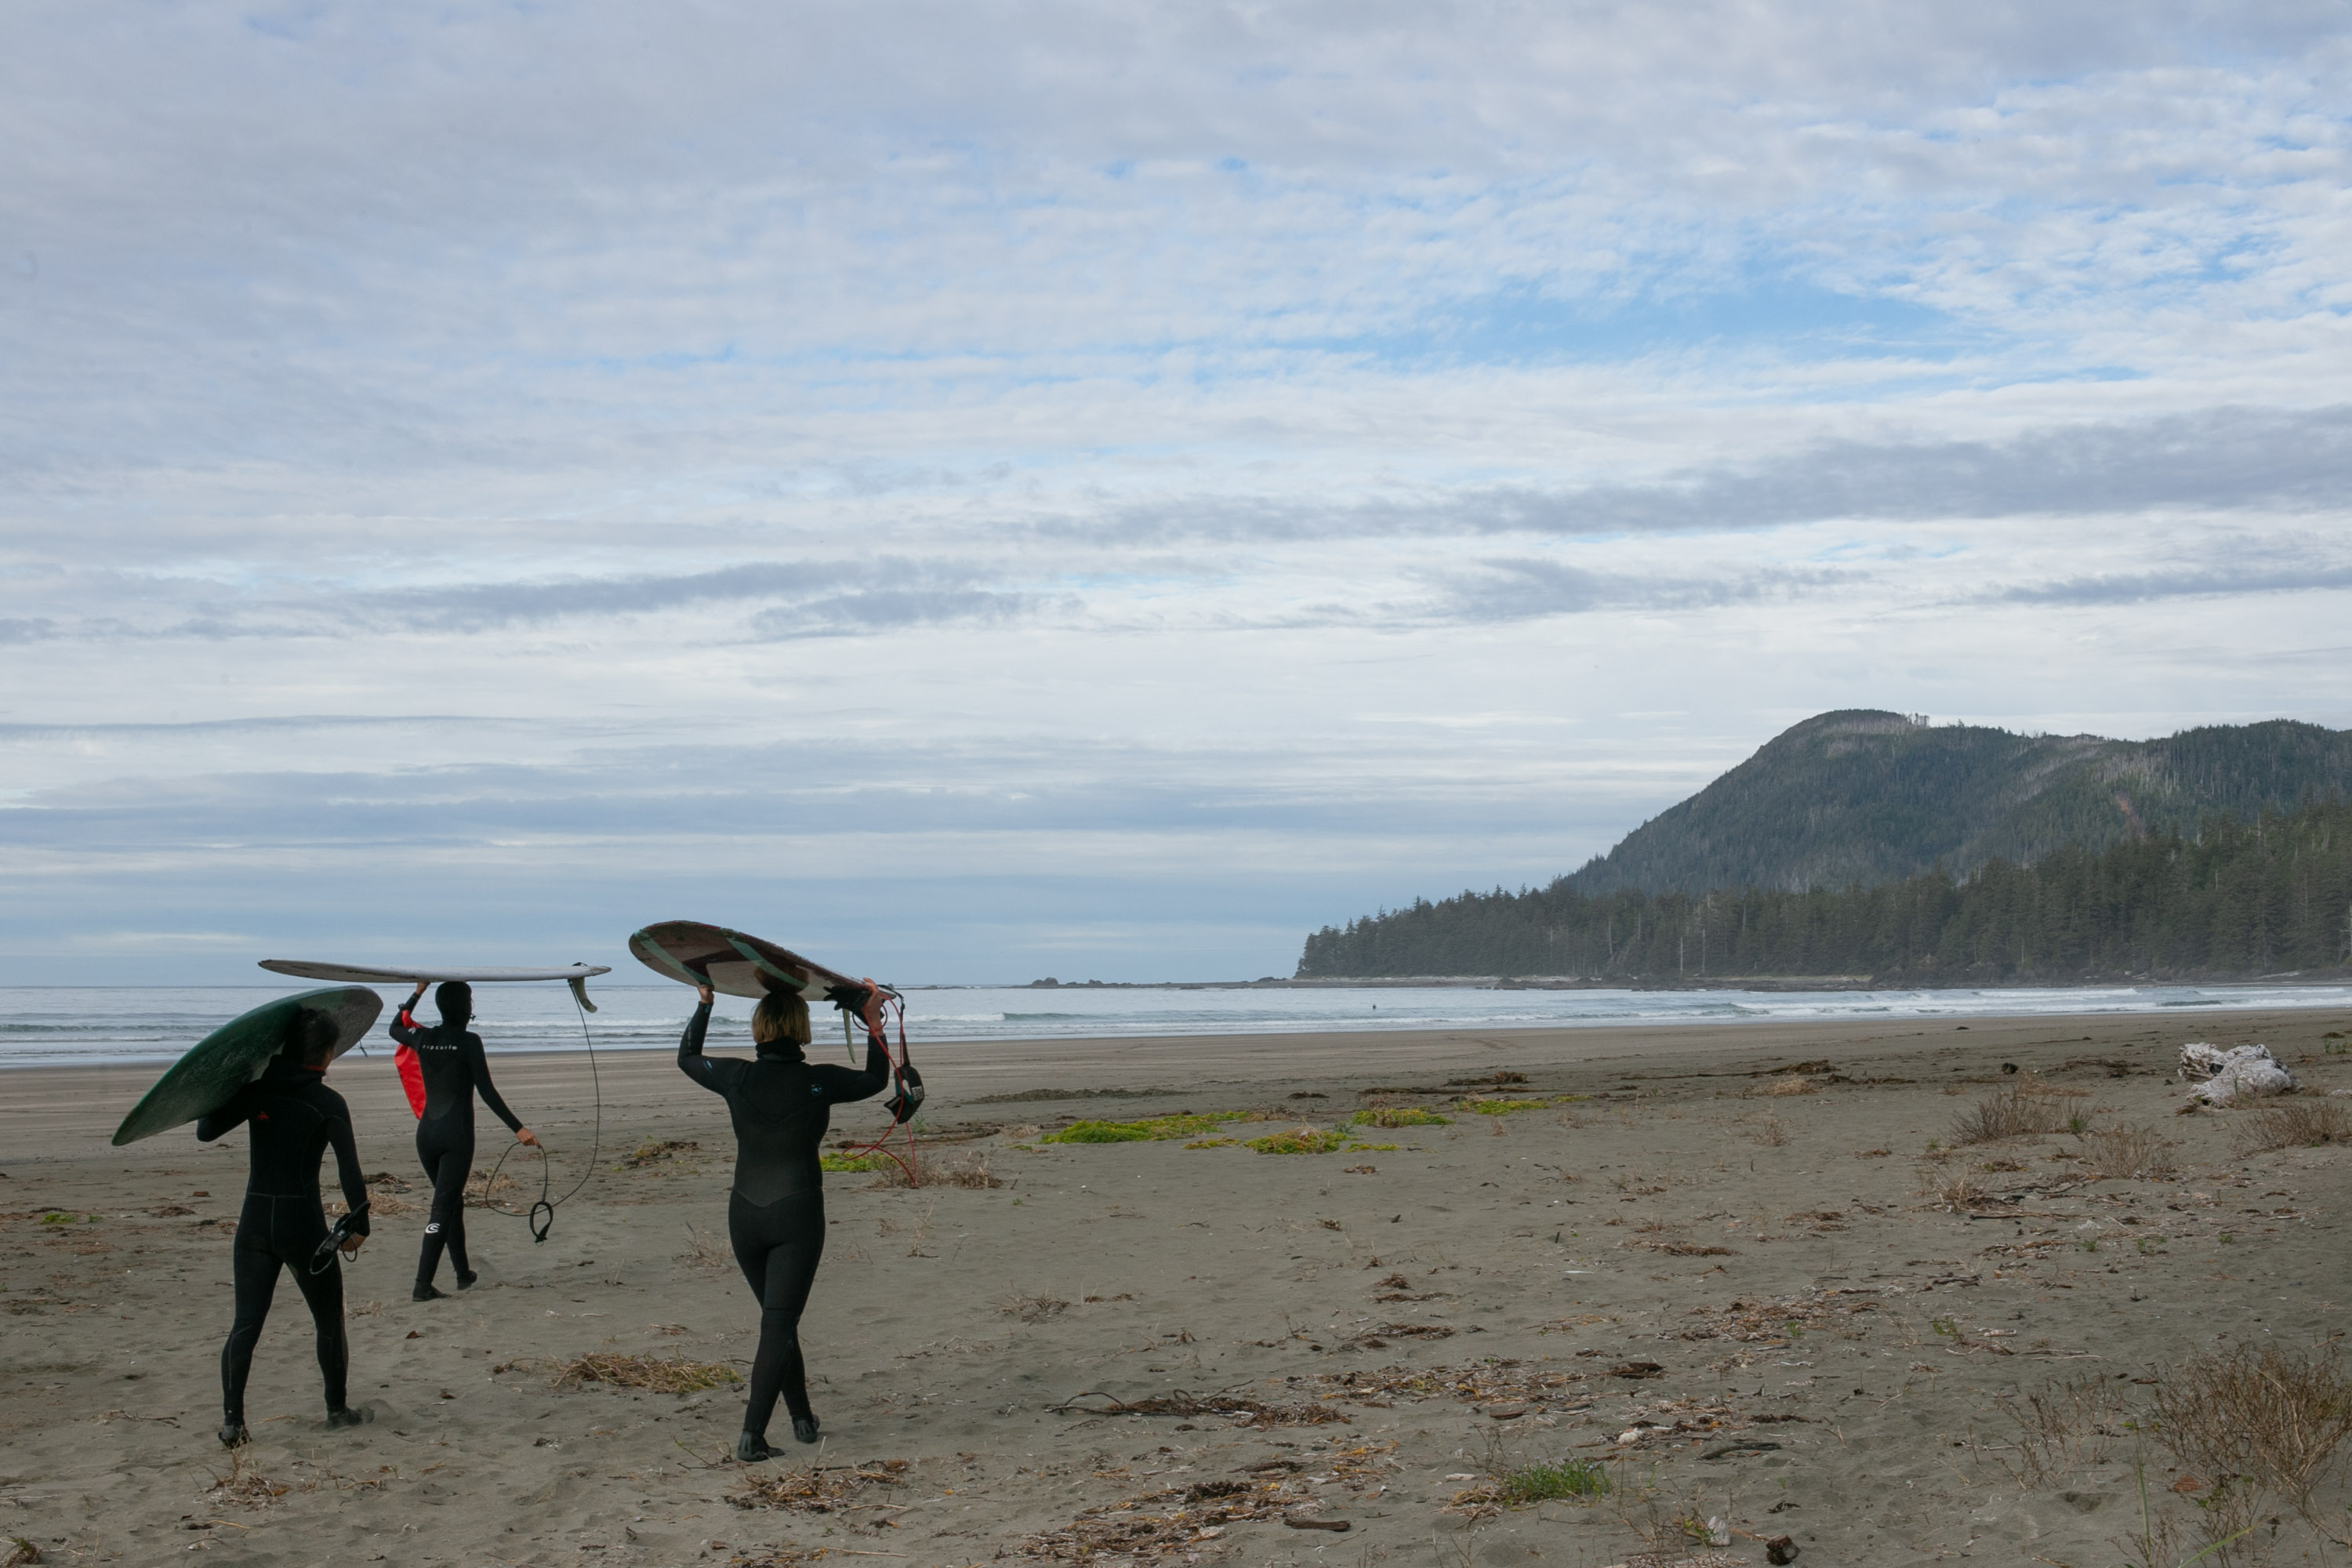 Three surfers are geared up and walking towards the ocean with their boards. In the misty distance you can view the mountains and forest.